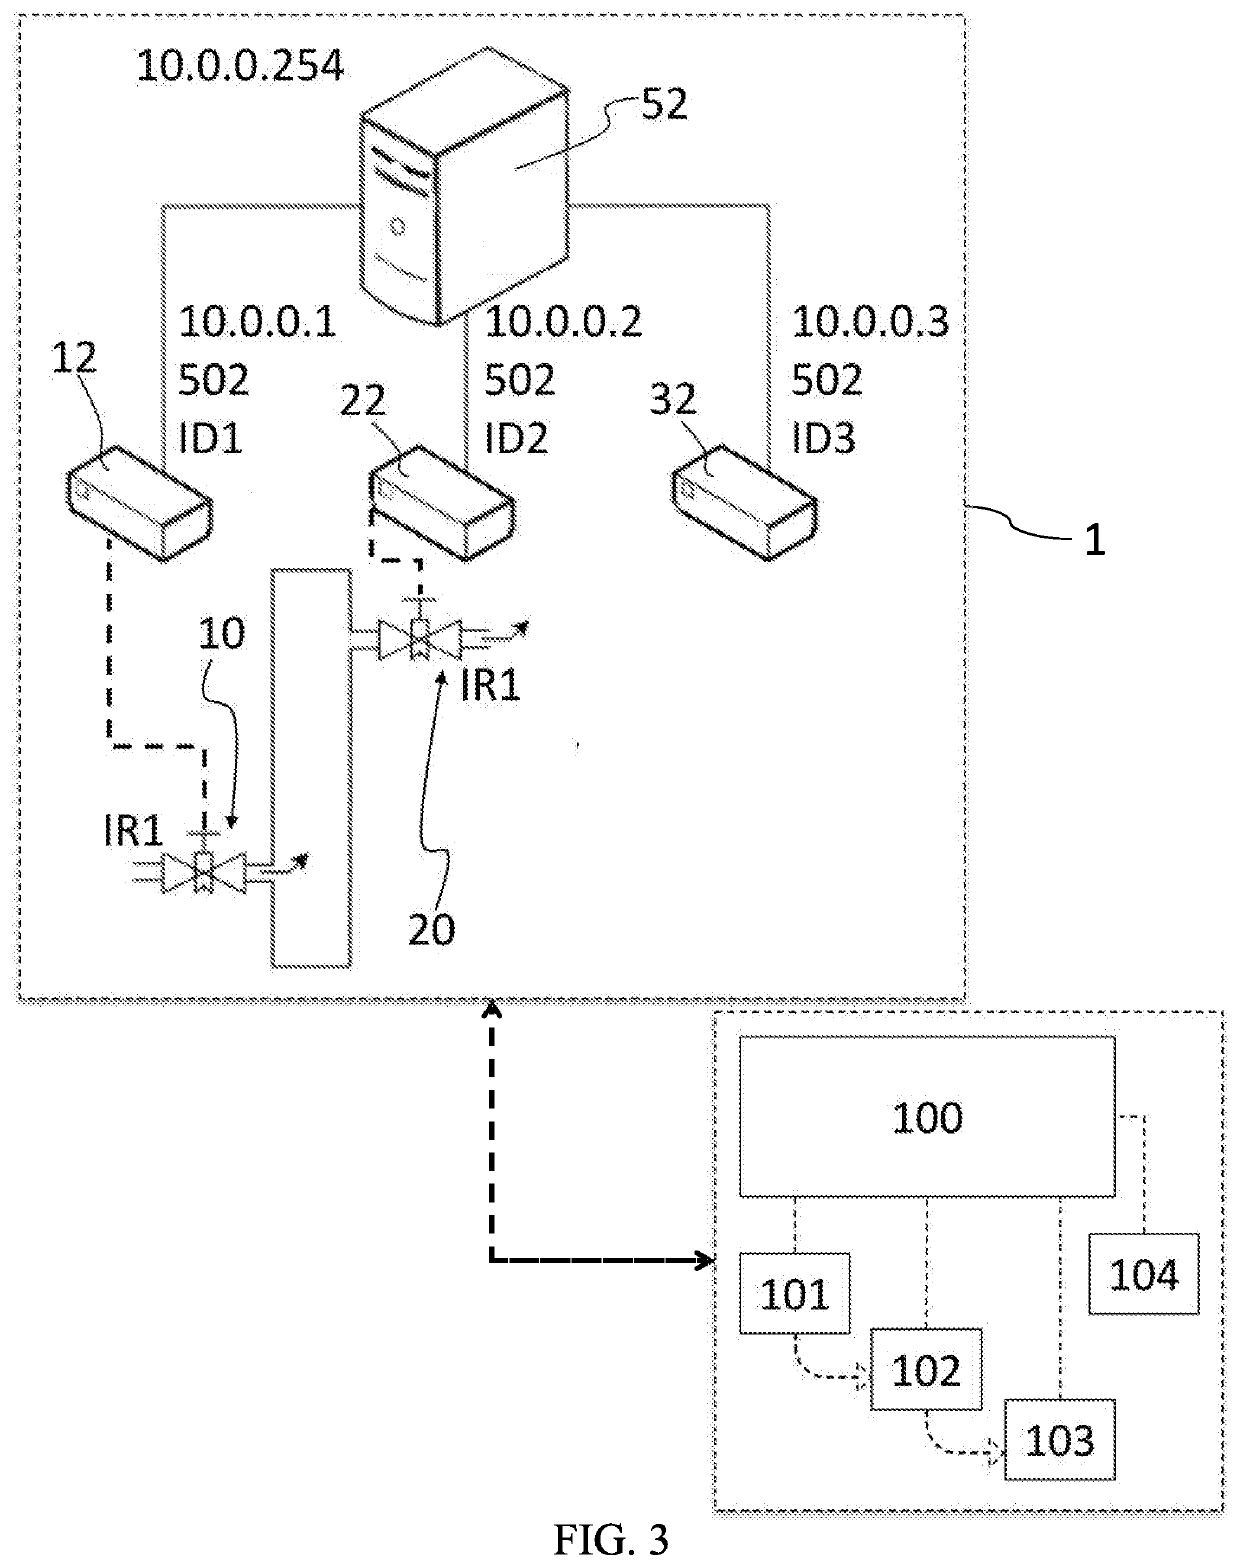 Method and apparatus for detecting the anomalies of an infrastructure